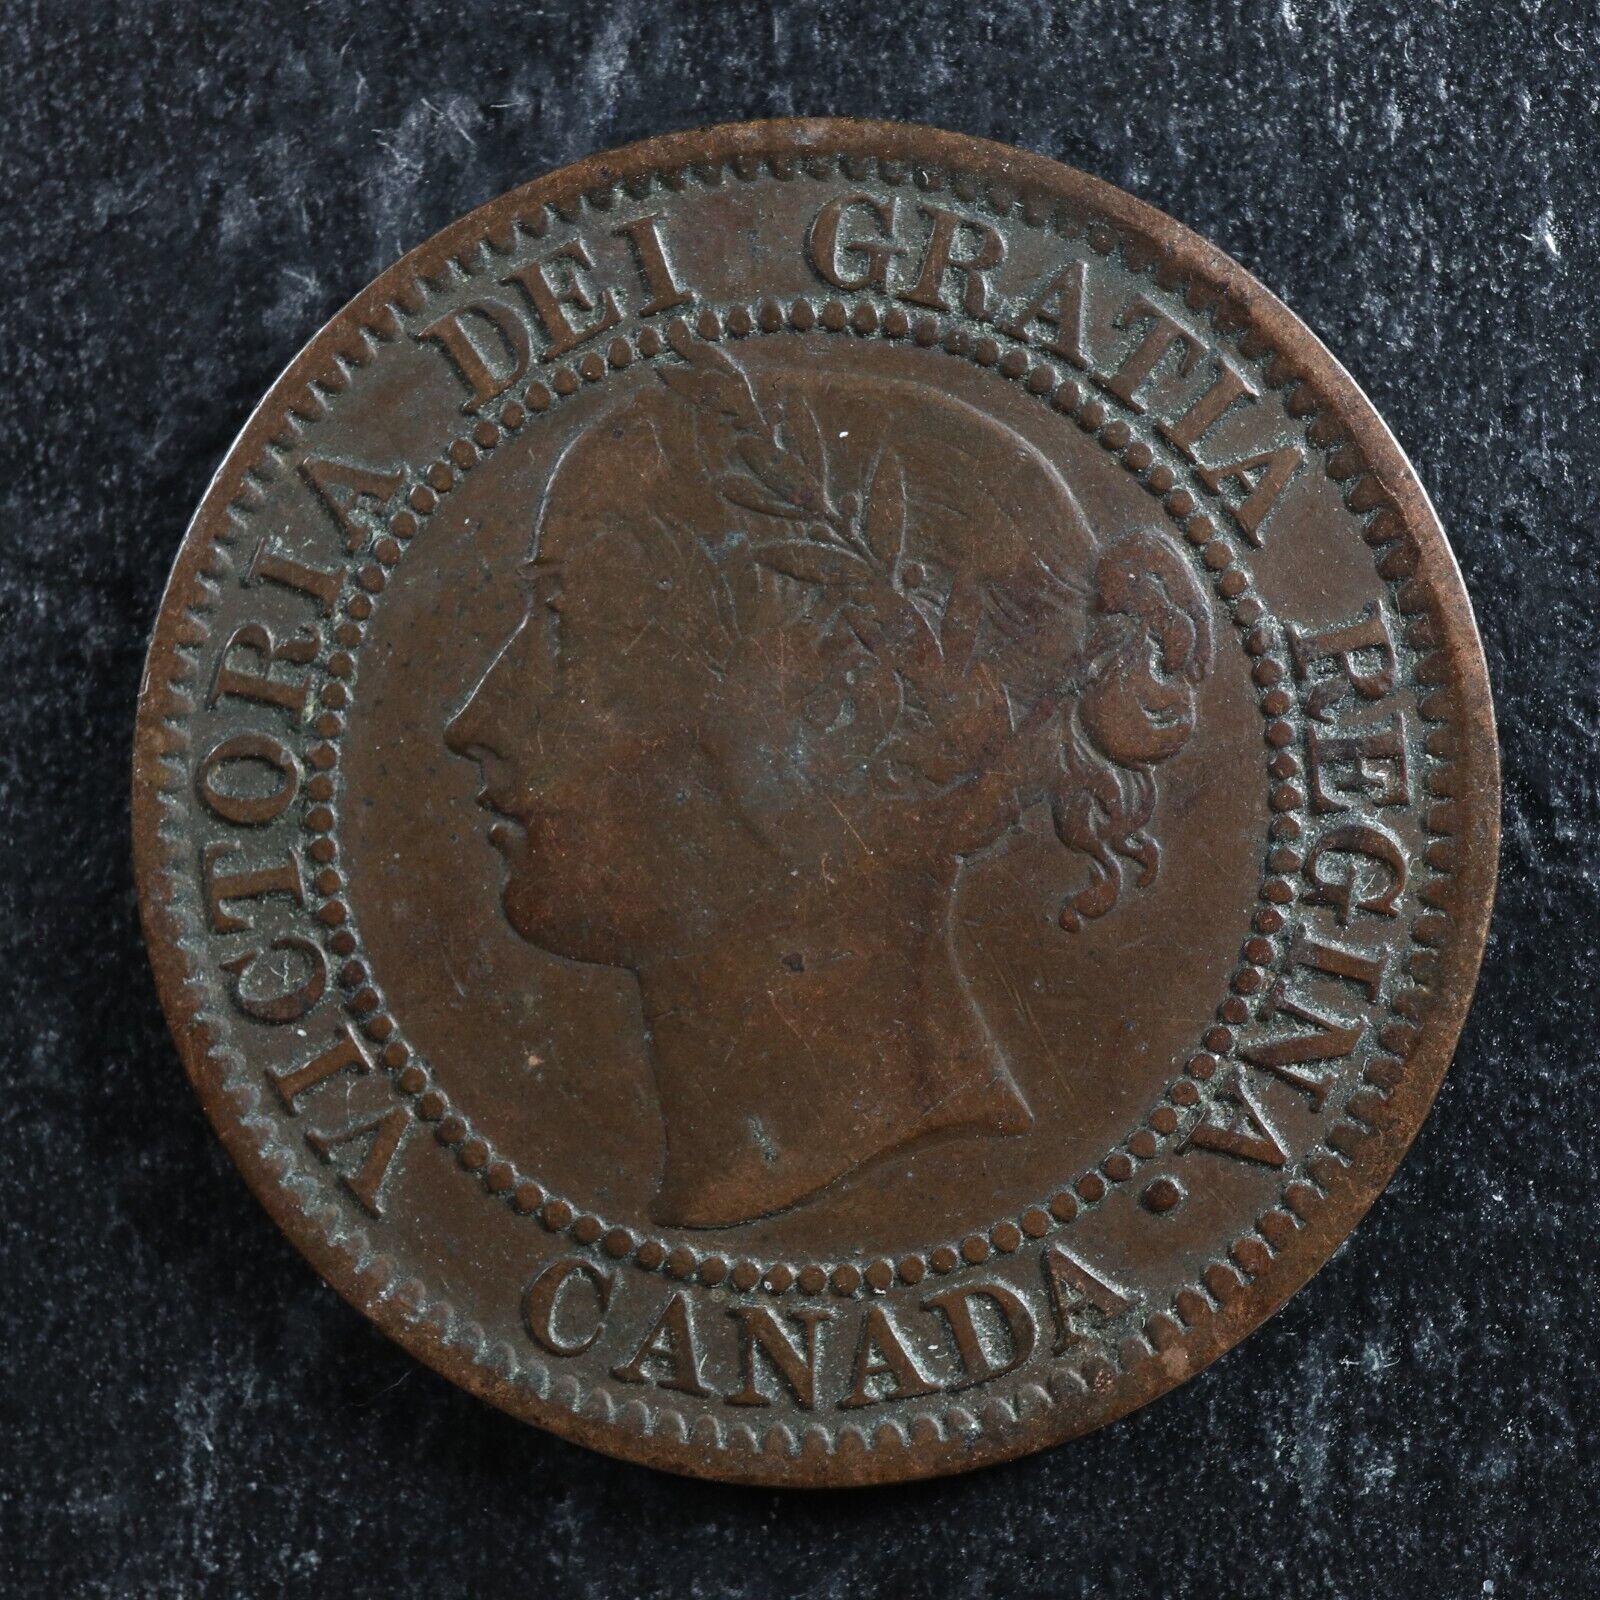 https://jetonscanada.com/wp-content/uploads/imported/1/1-cent-18598-Wide-9-Canada-one-large-penny-Queen-Victoria-c-VG-10-276000143171-2.jpg